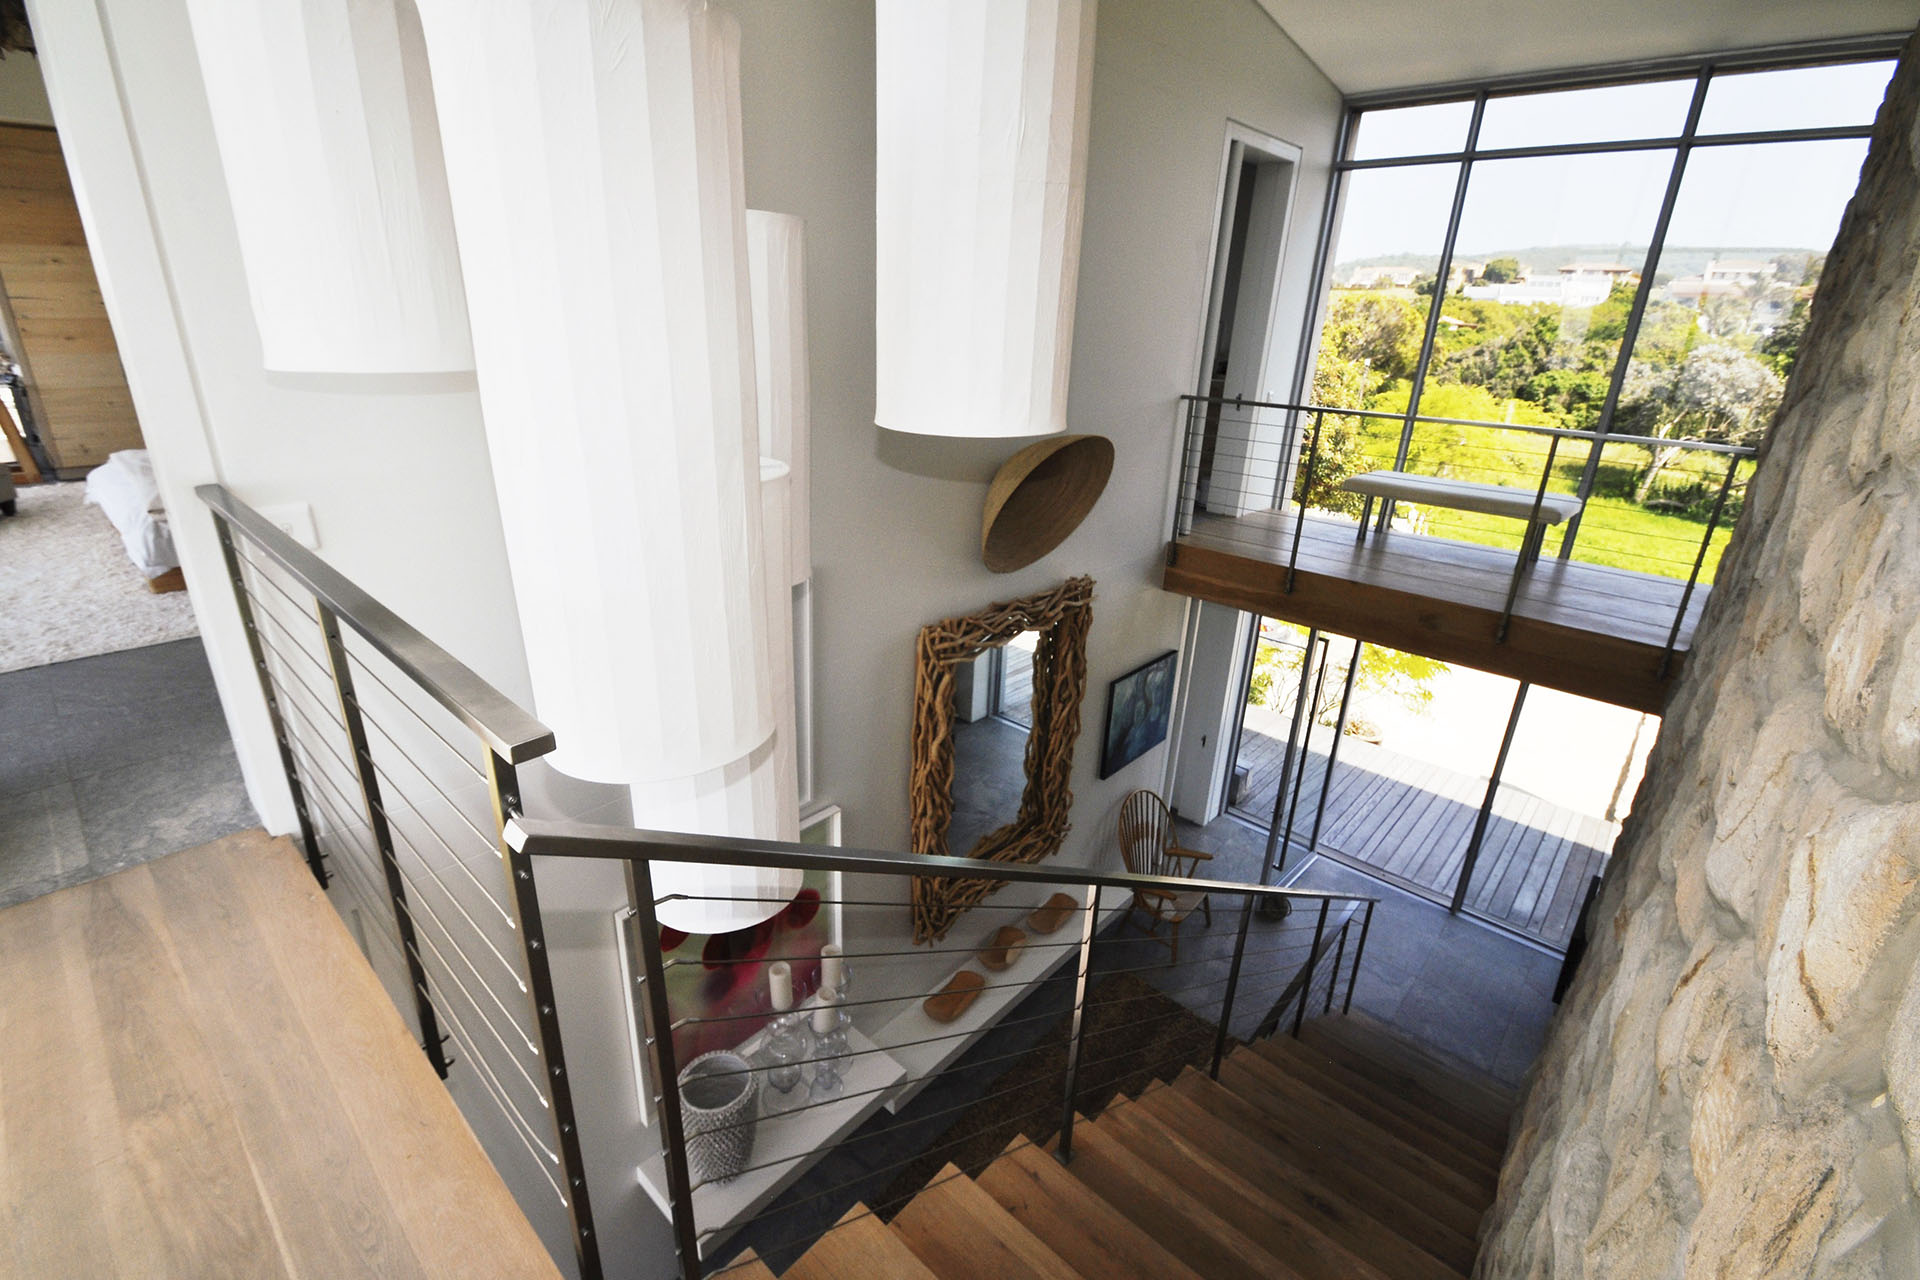 Photo 11 of The Dune House accommodation in Plettenberg Bay, Cape Town with 6 bedrooms and 7 bathrooms